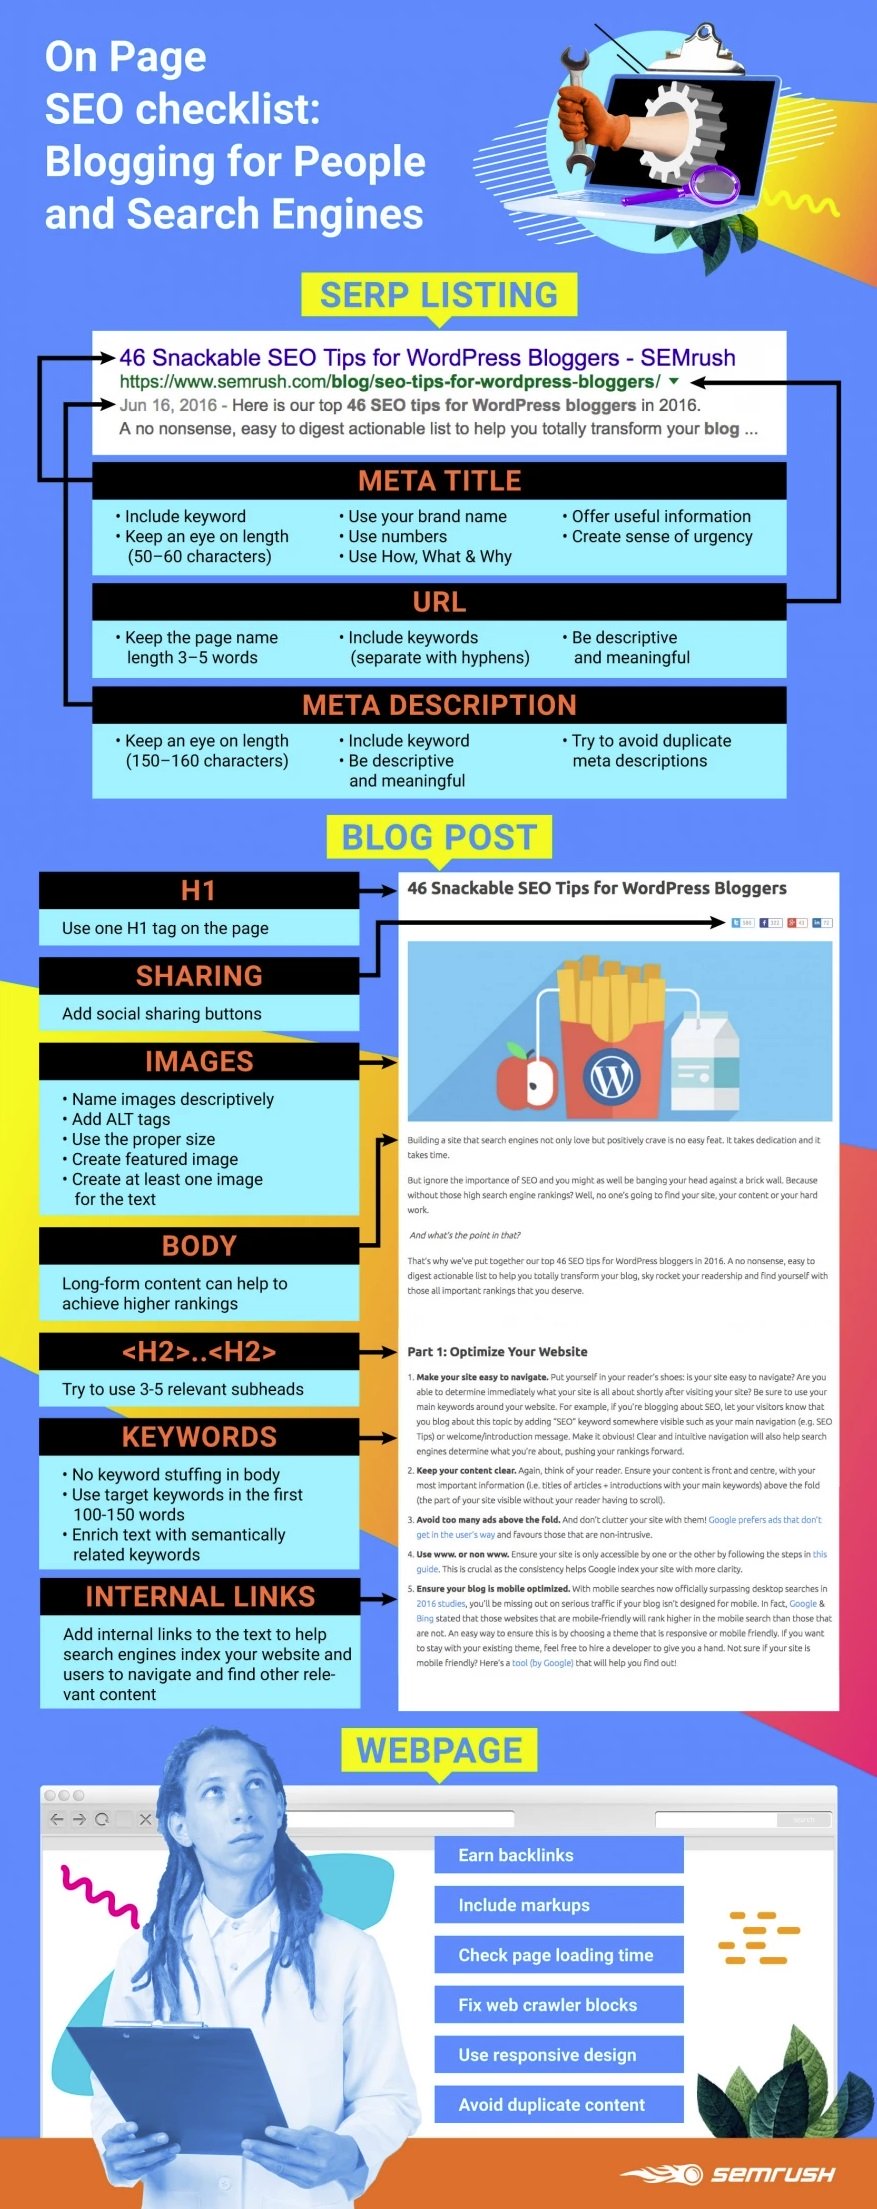 on page seo checklist blogging for people and search engines infographic